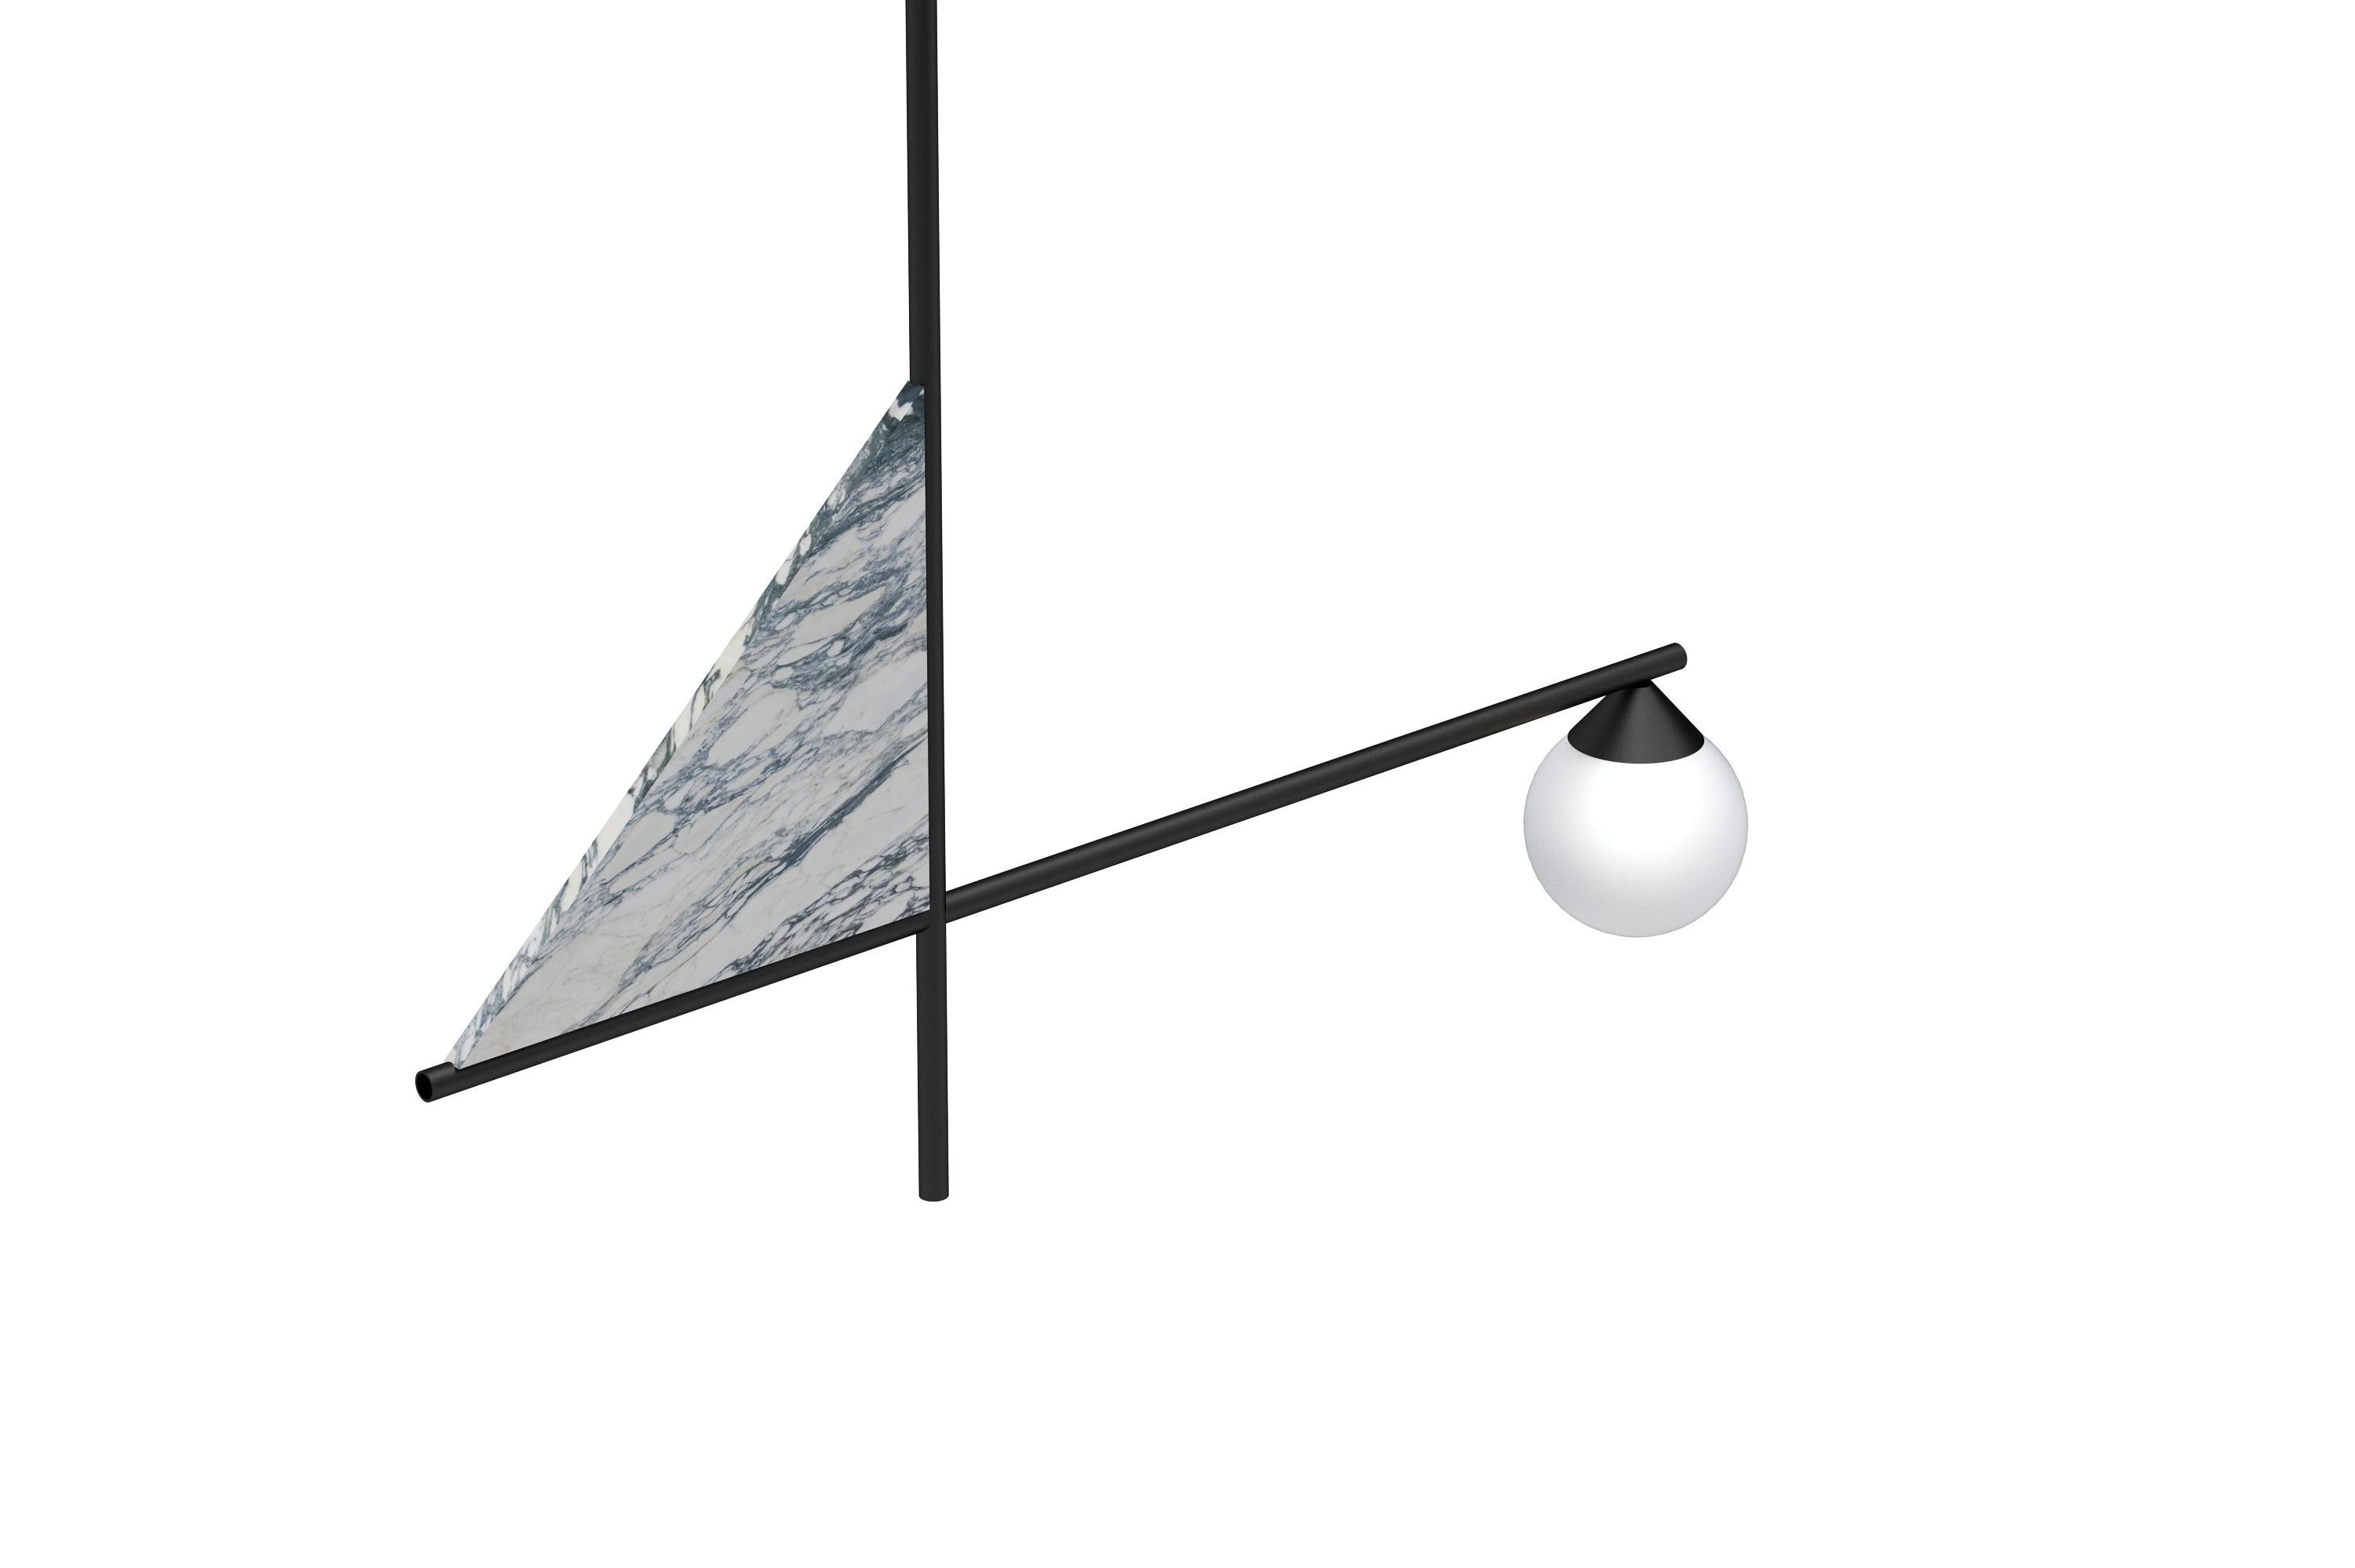 This lighting feature is made of white Carrara marble with green veins. Originating from Italy, this triangular shaped sits on two perpendicular black metal poles. One bulb hangs from the end of the horizontal pole. The shape of this light is